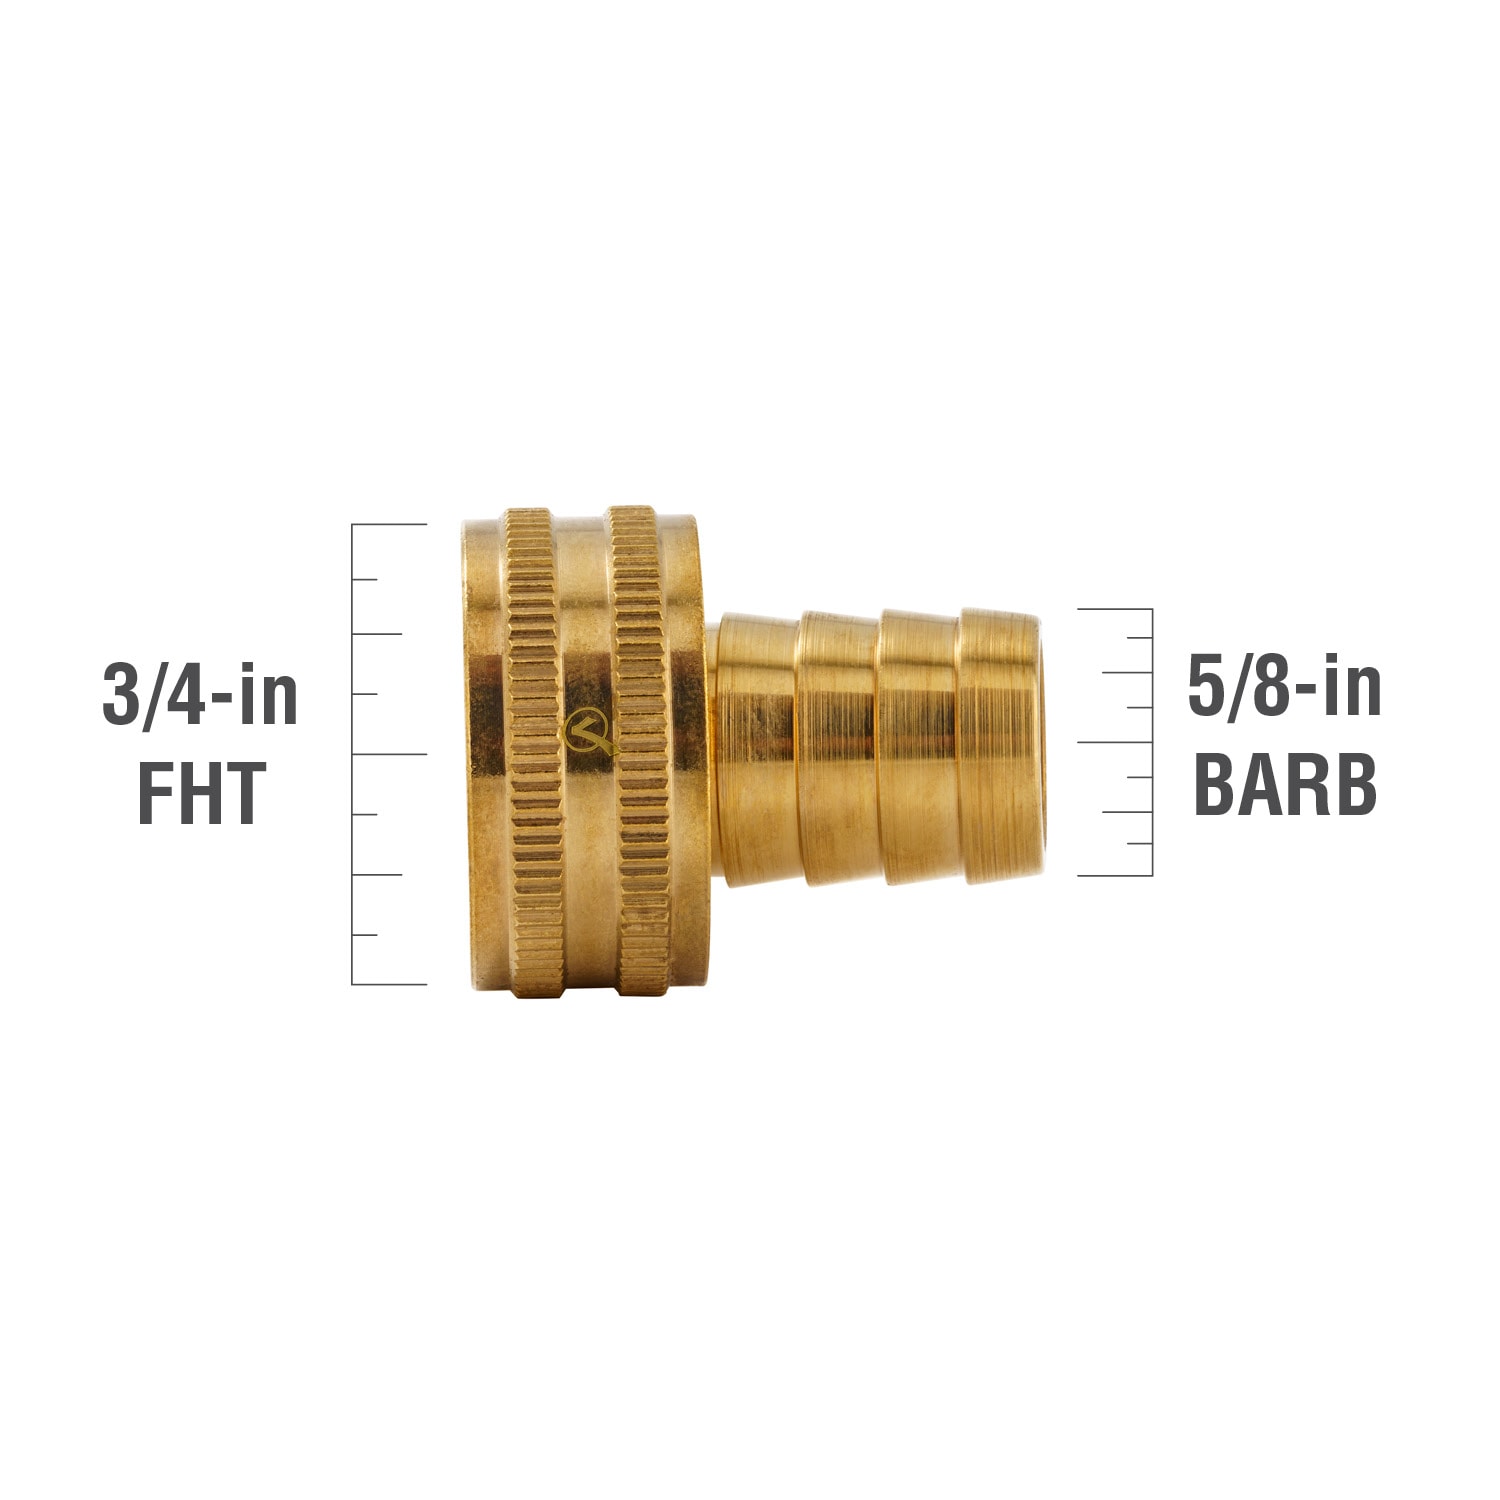 3/4-in x 5/8-in Threaded Adapter Fitting